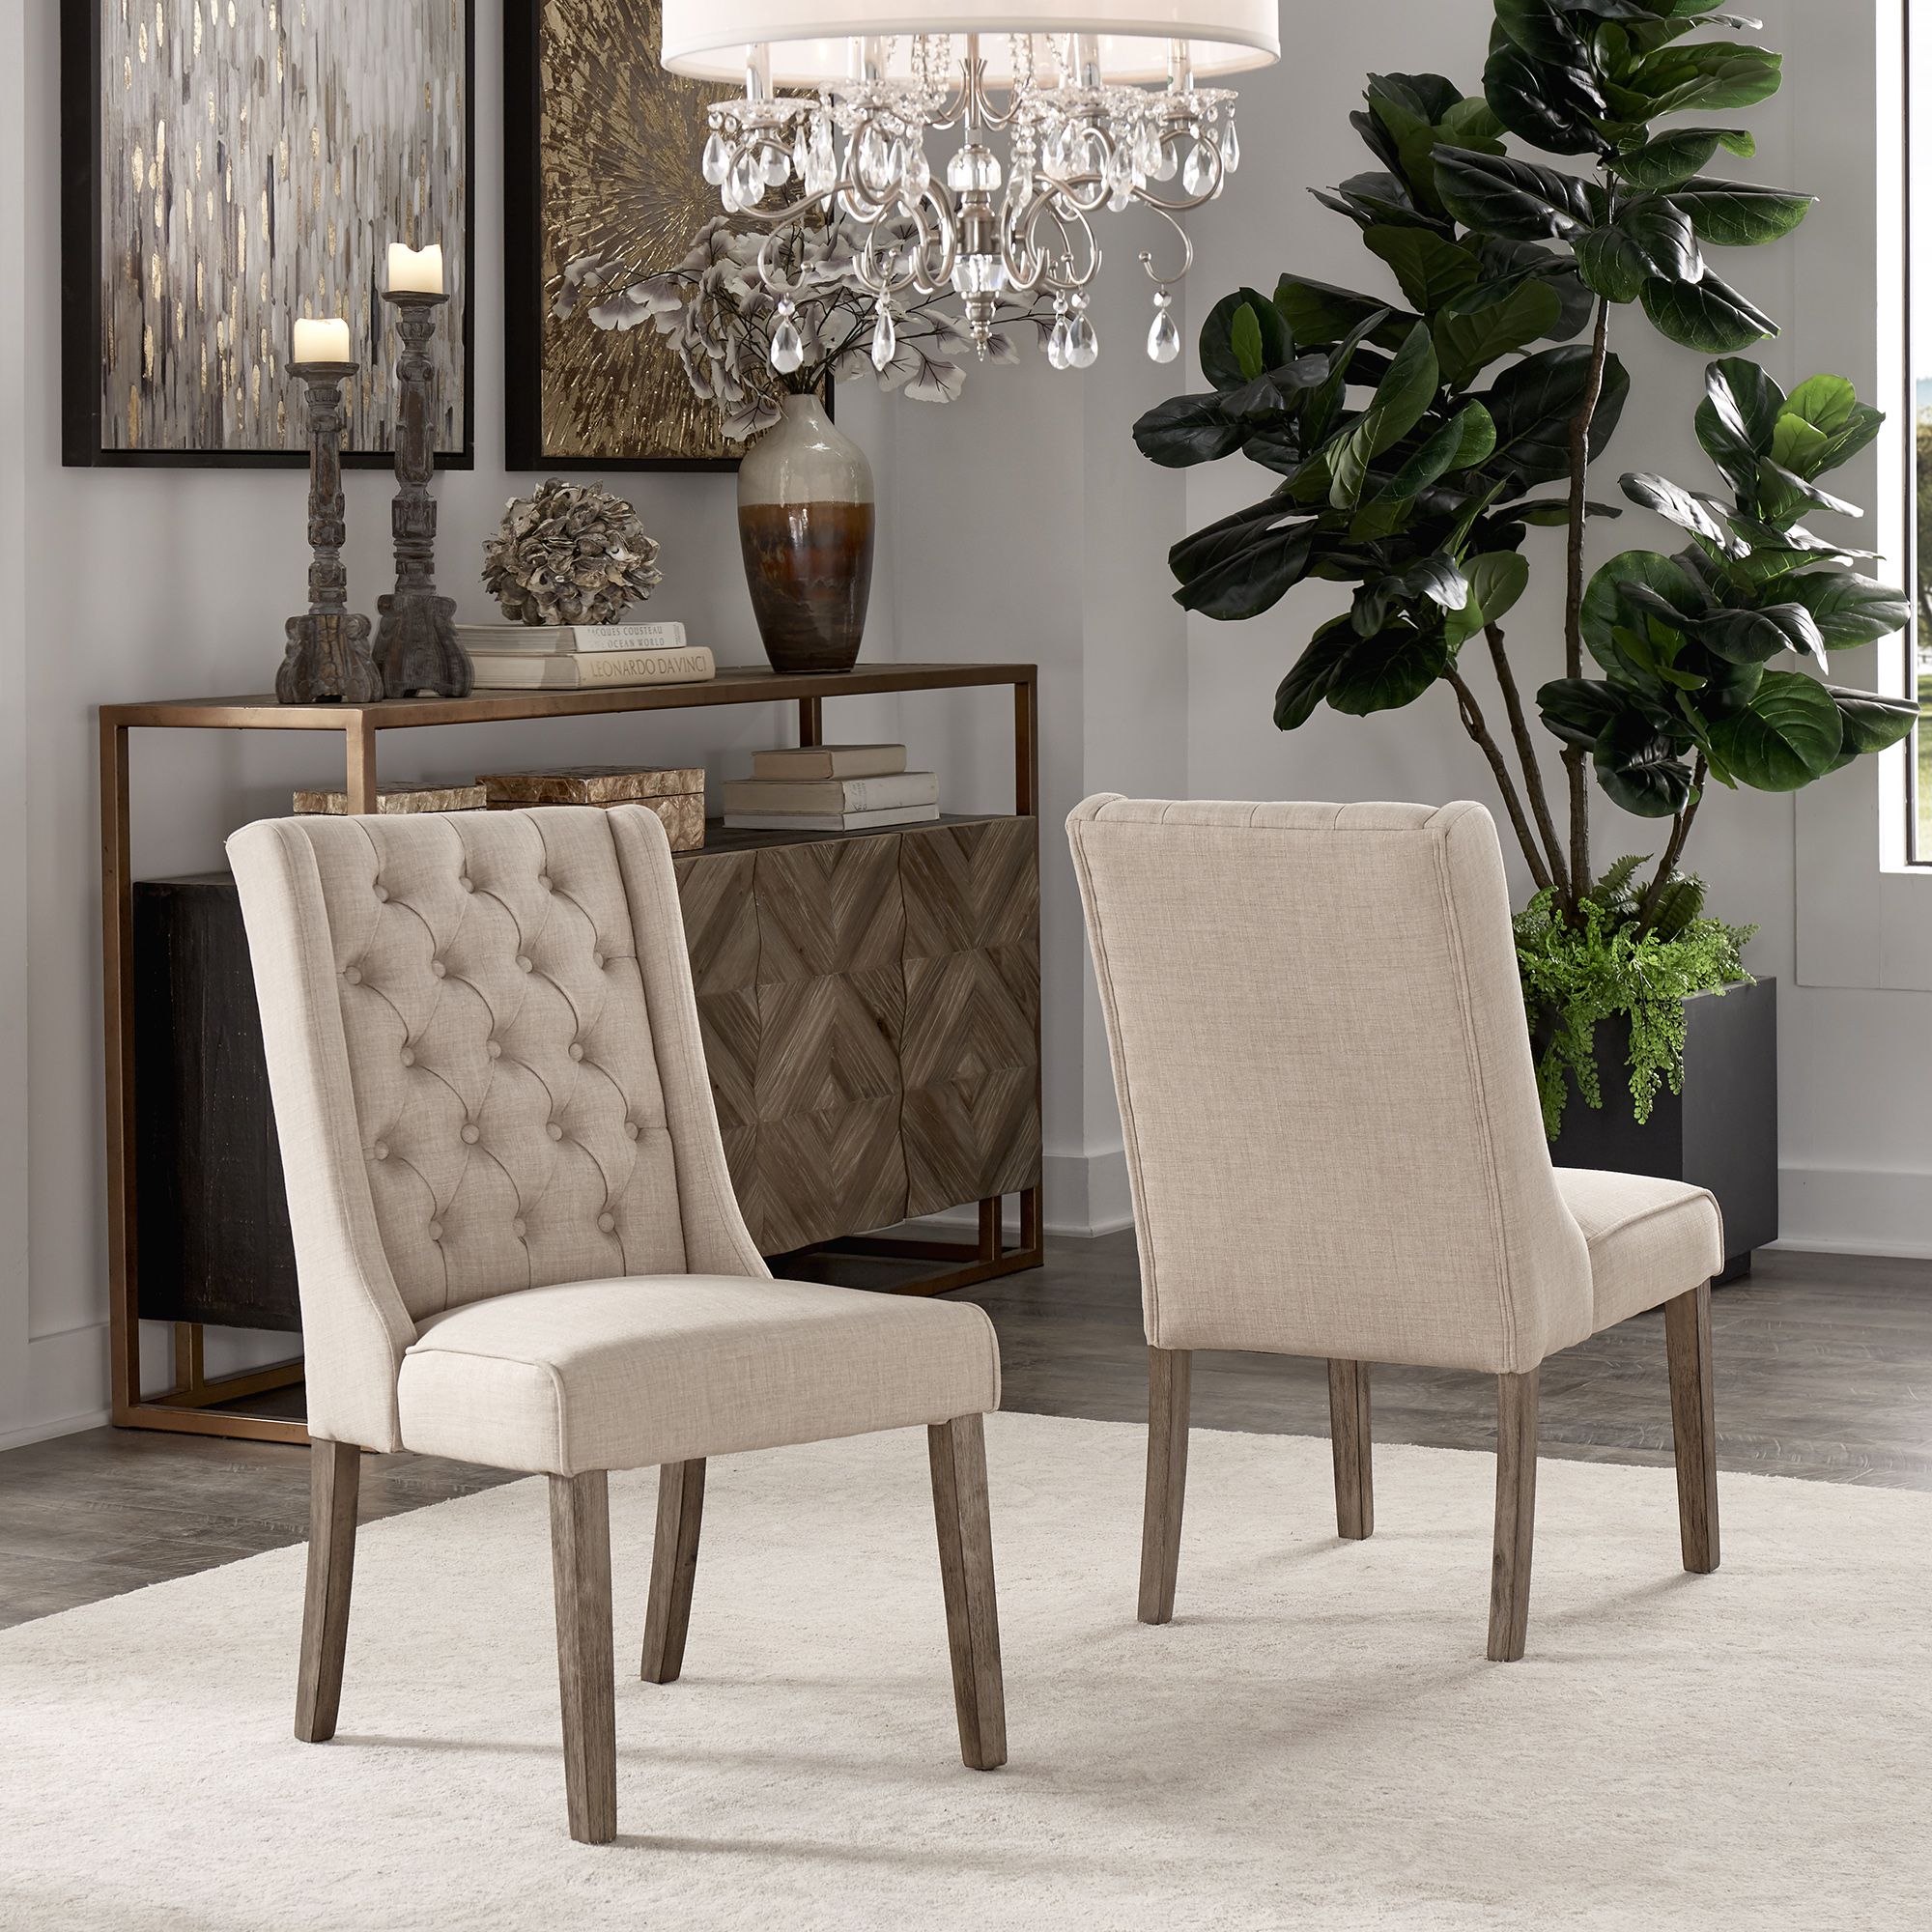 Tufted Linen Upholstered Side Chairs (Set of 2)